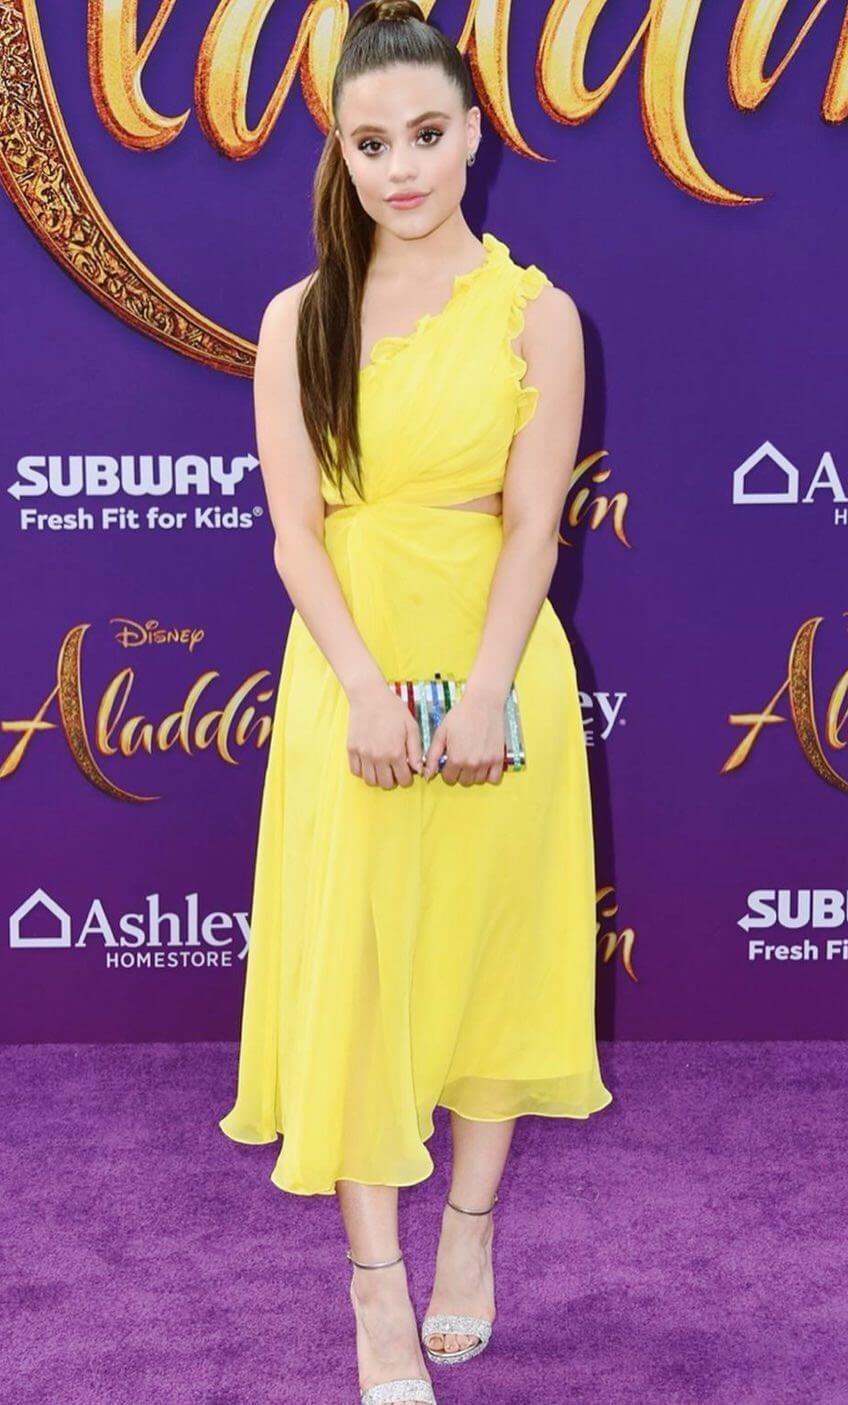 Sarah Jeffery - Outfits, Accessories, Hairstyles and Looks - K4 Fashion